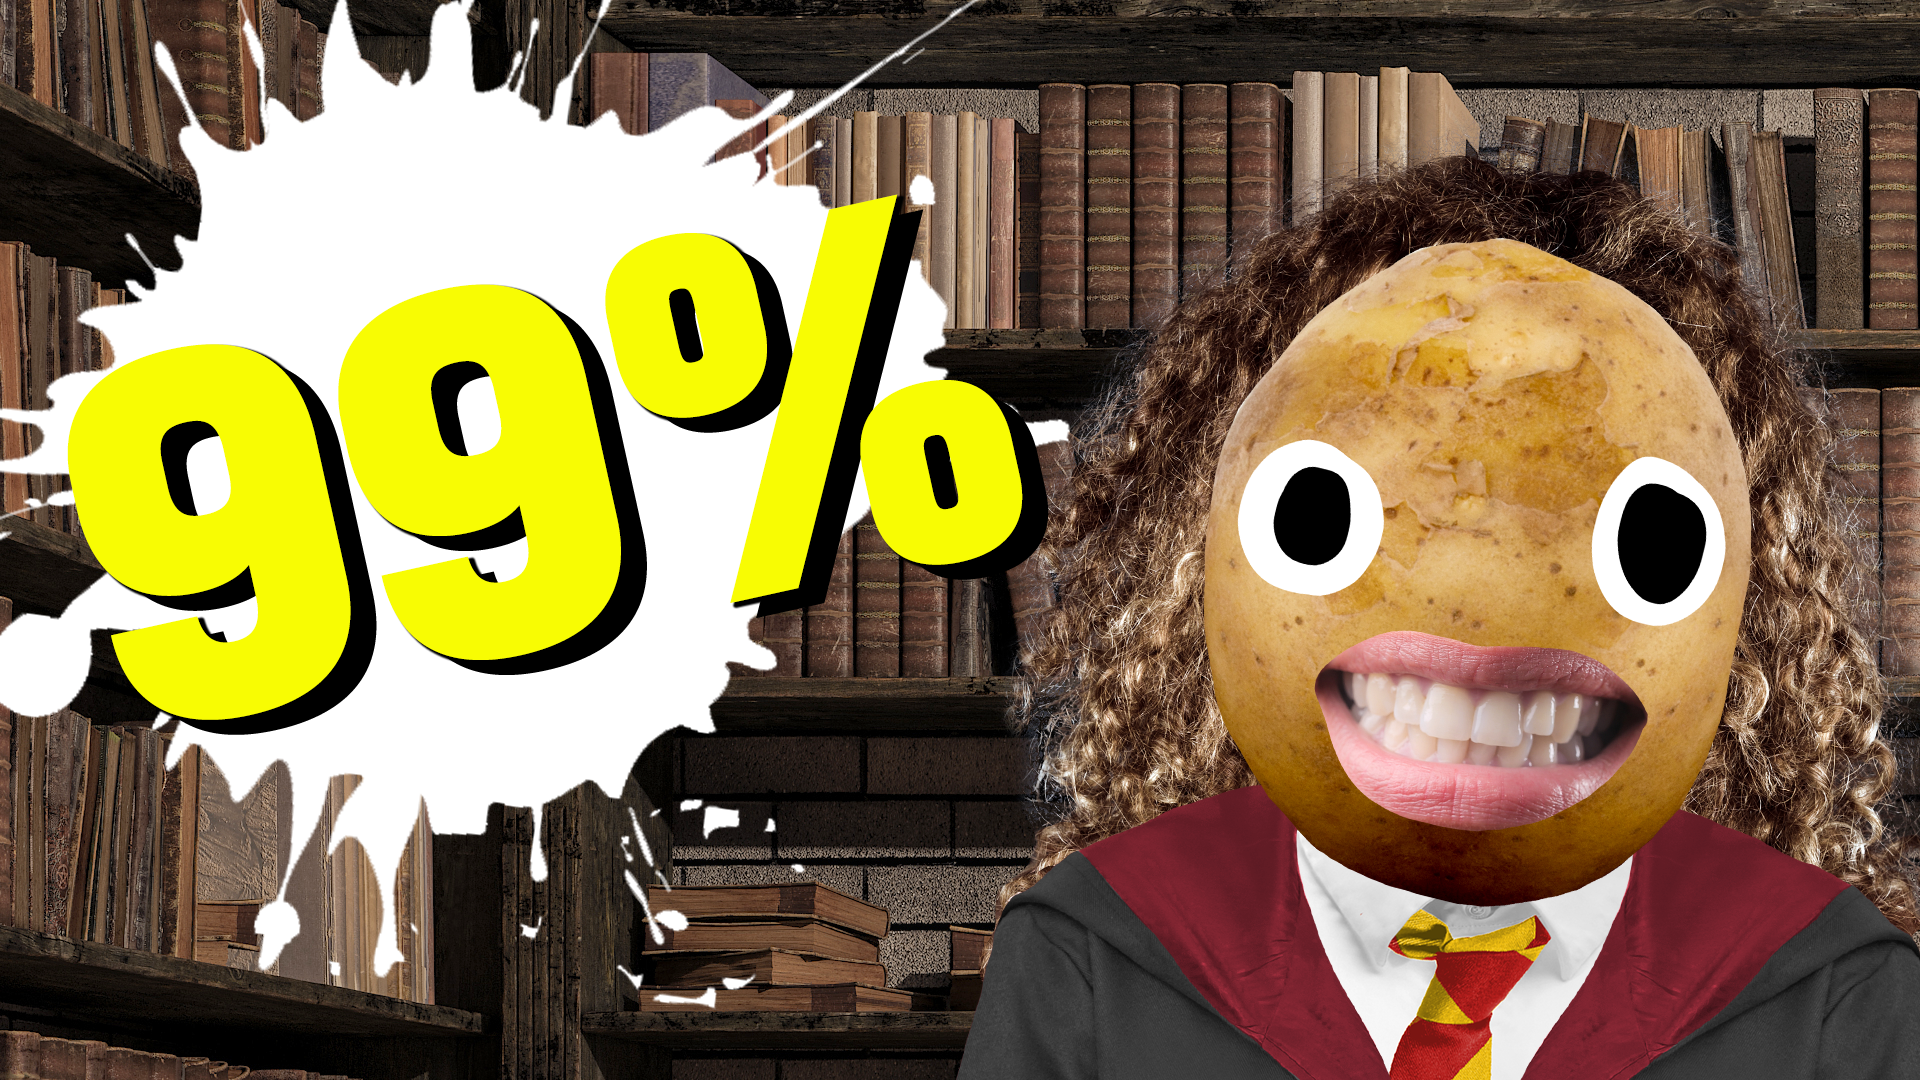 Result: 99 per cent Hermione